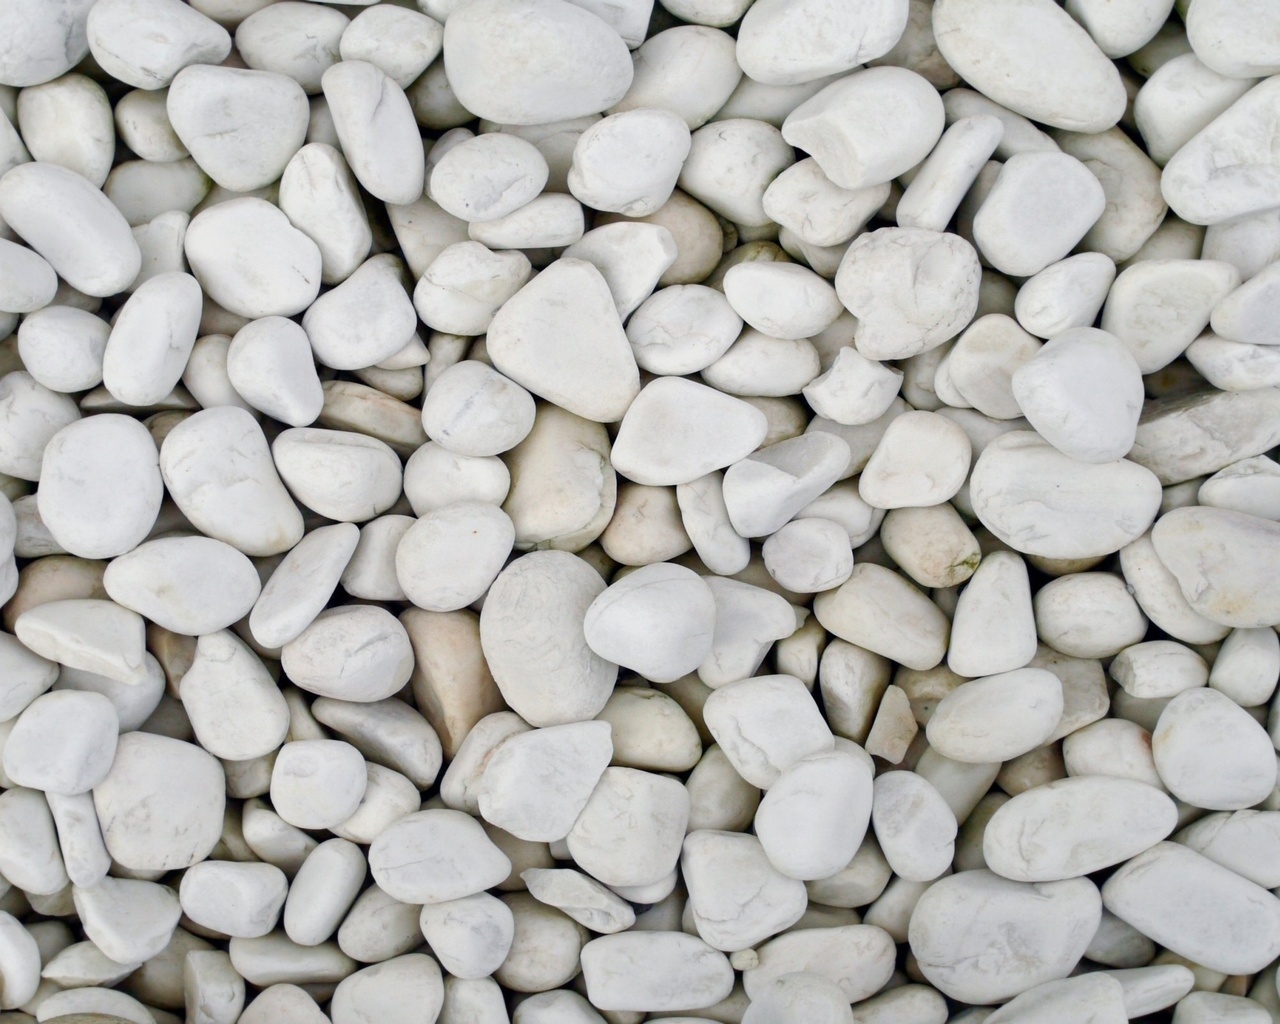 White Pebbles for 1280 x 1024 resolution